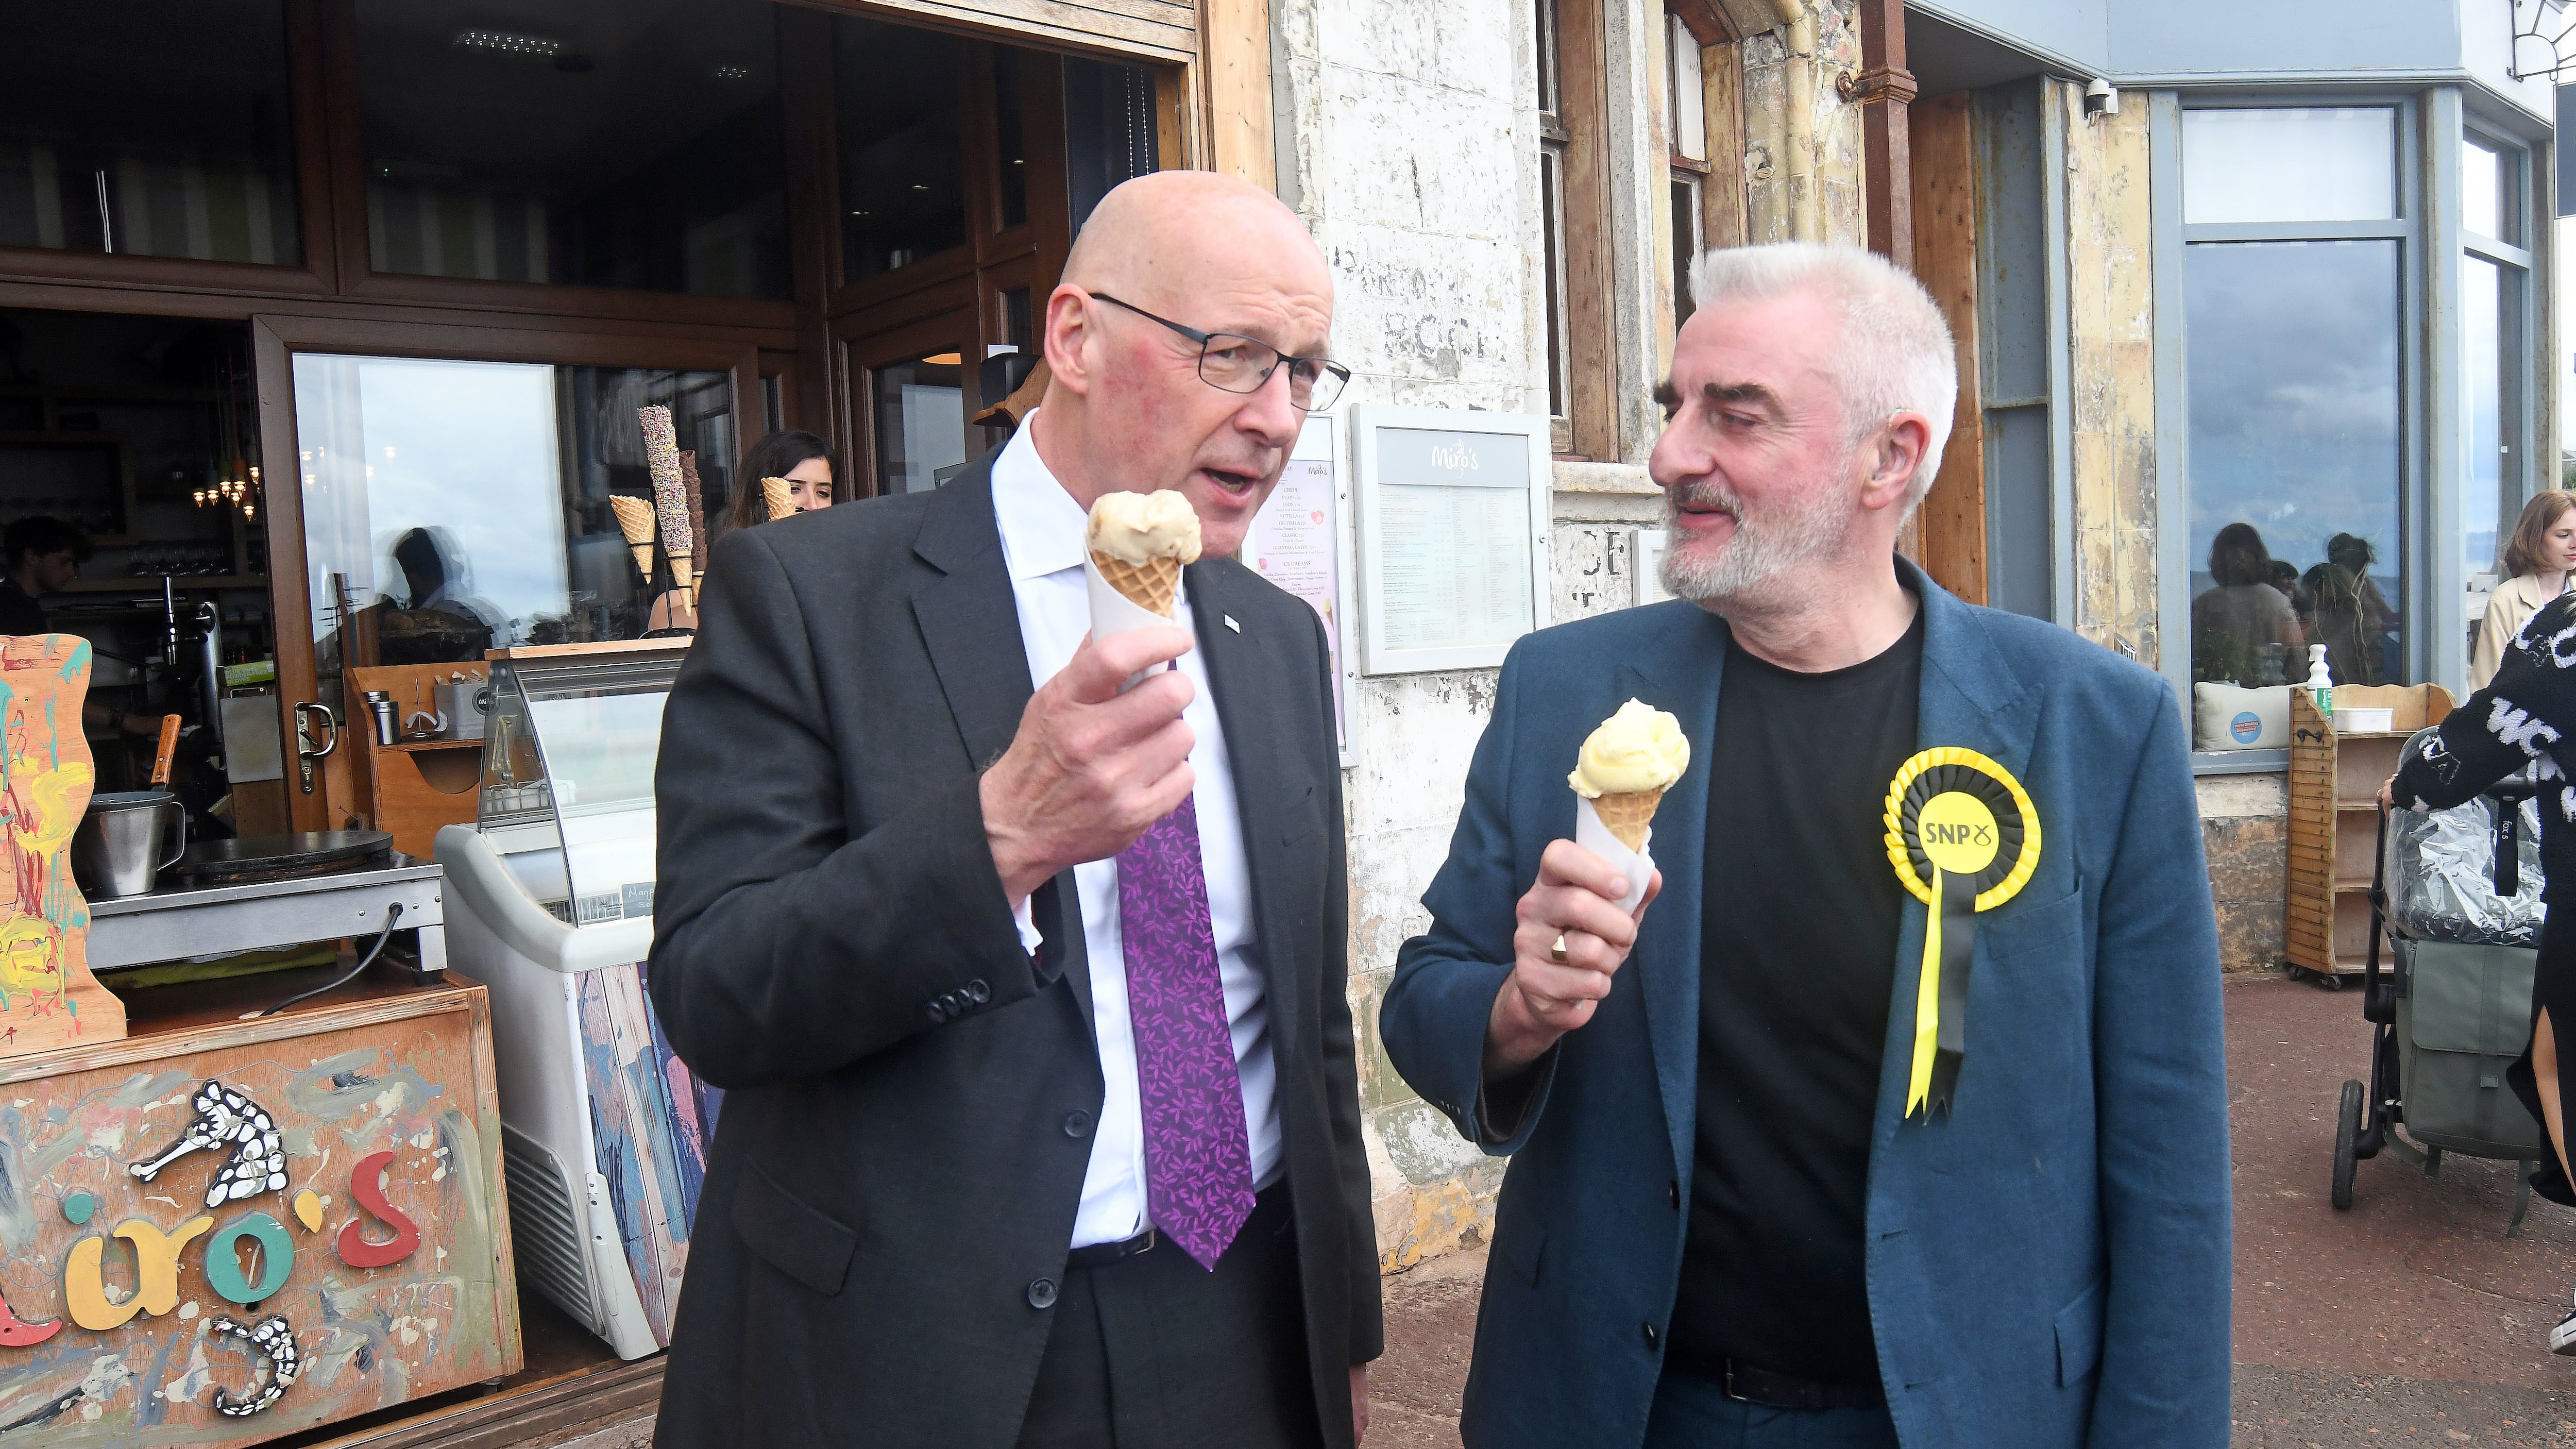 SNP Leader John Swinney (left) joins the SNP candidate for Edinburgh East and Musselburgh, Tommy Sheppard, at Portobello Beach and Promenade, while on the General Election campaign trial